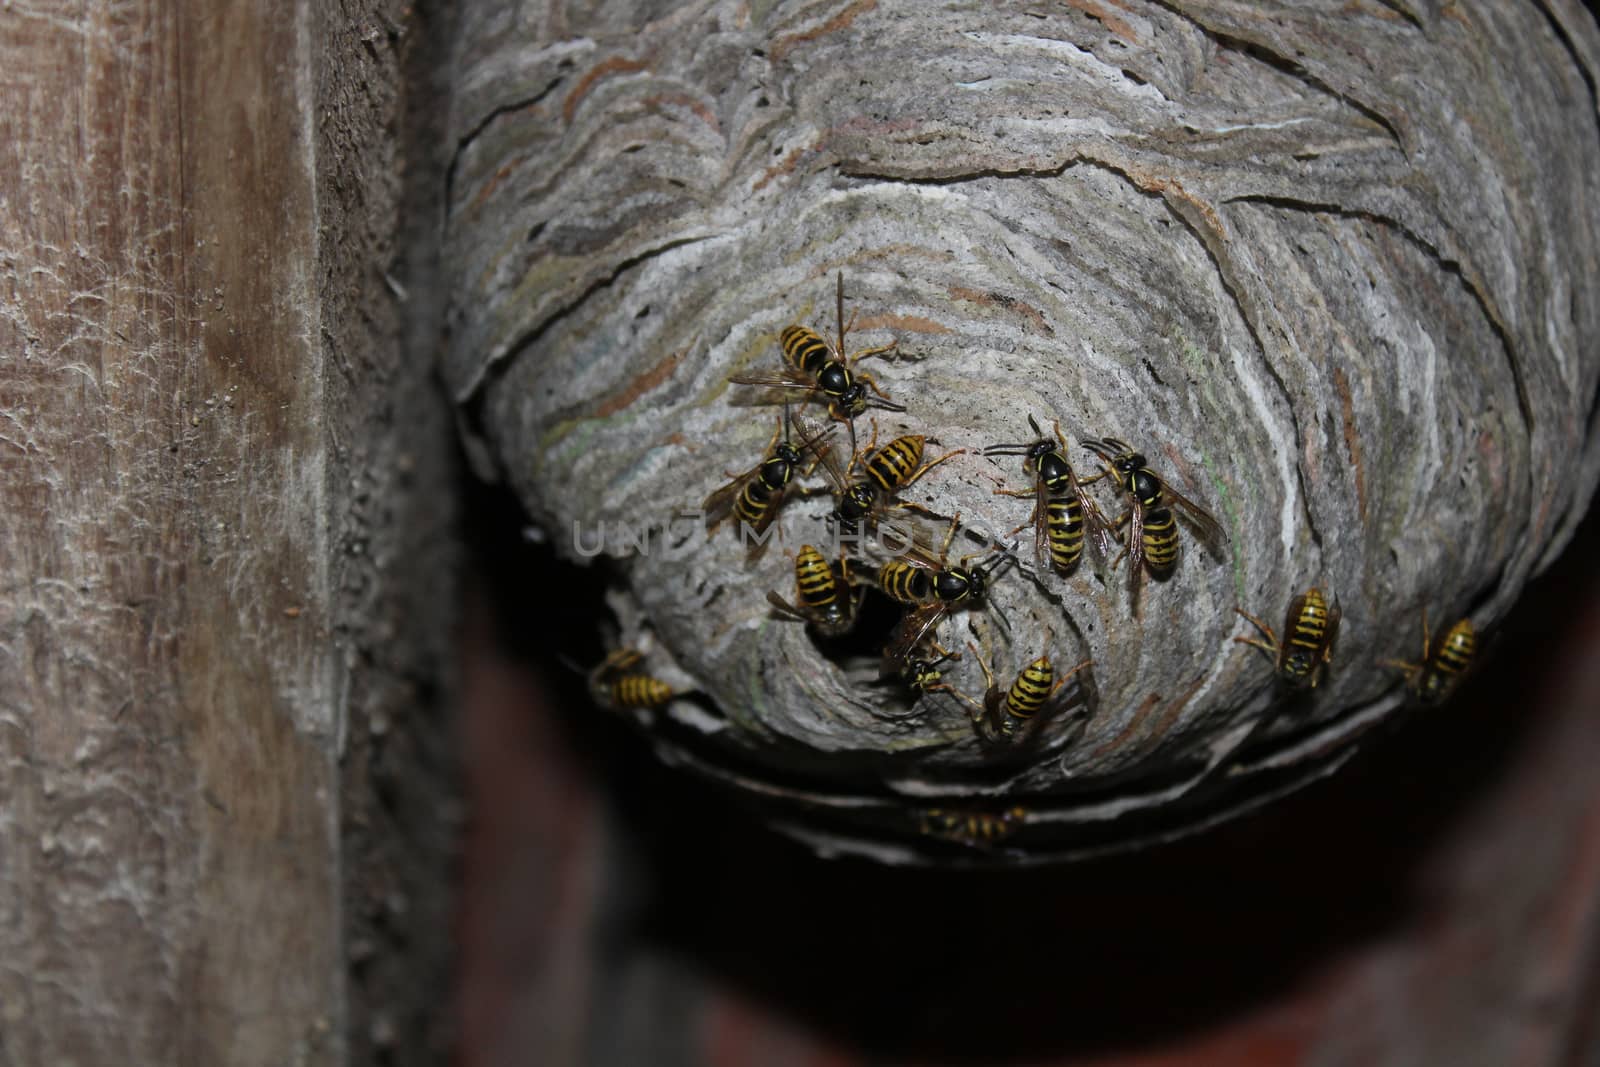 The picture shows many wasps nest and wasps